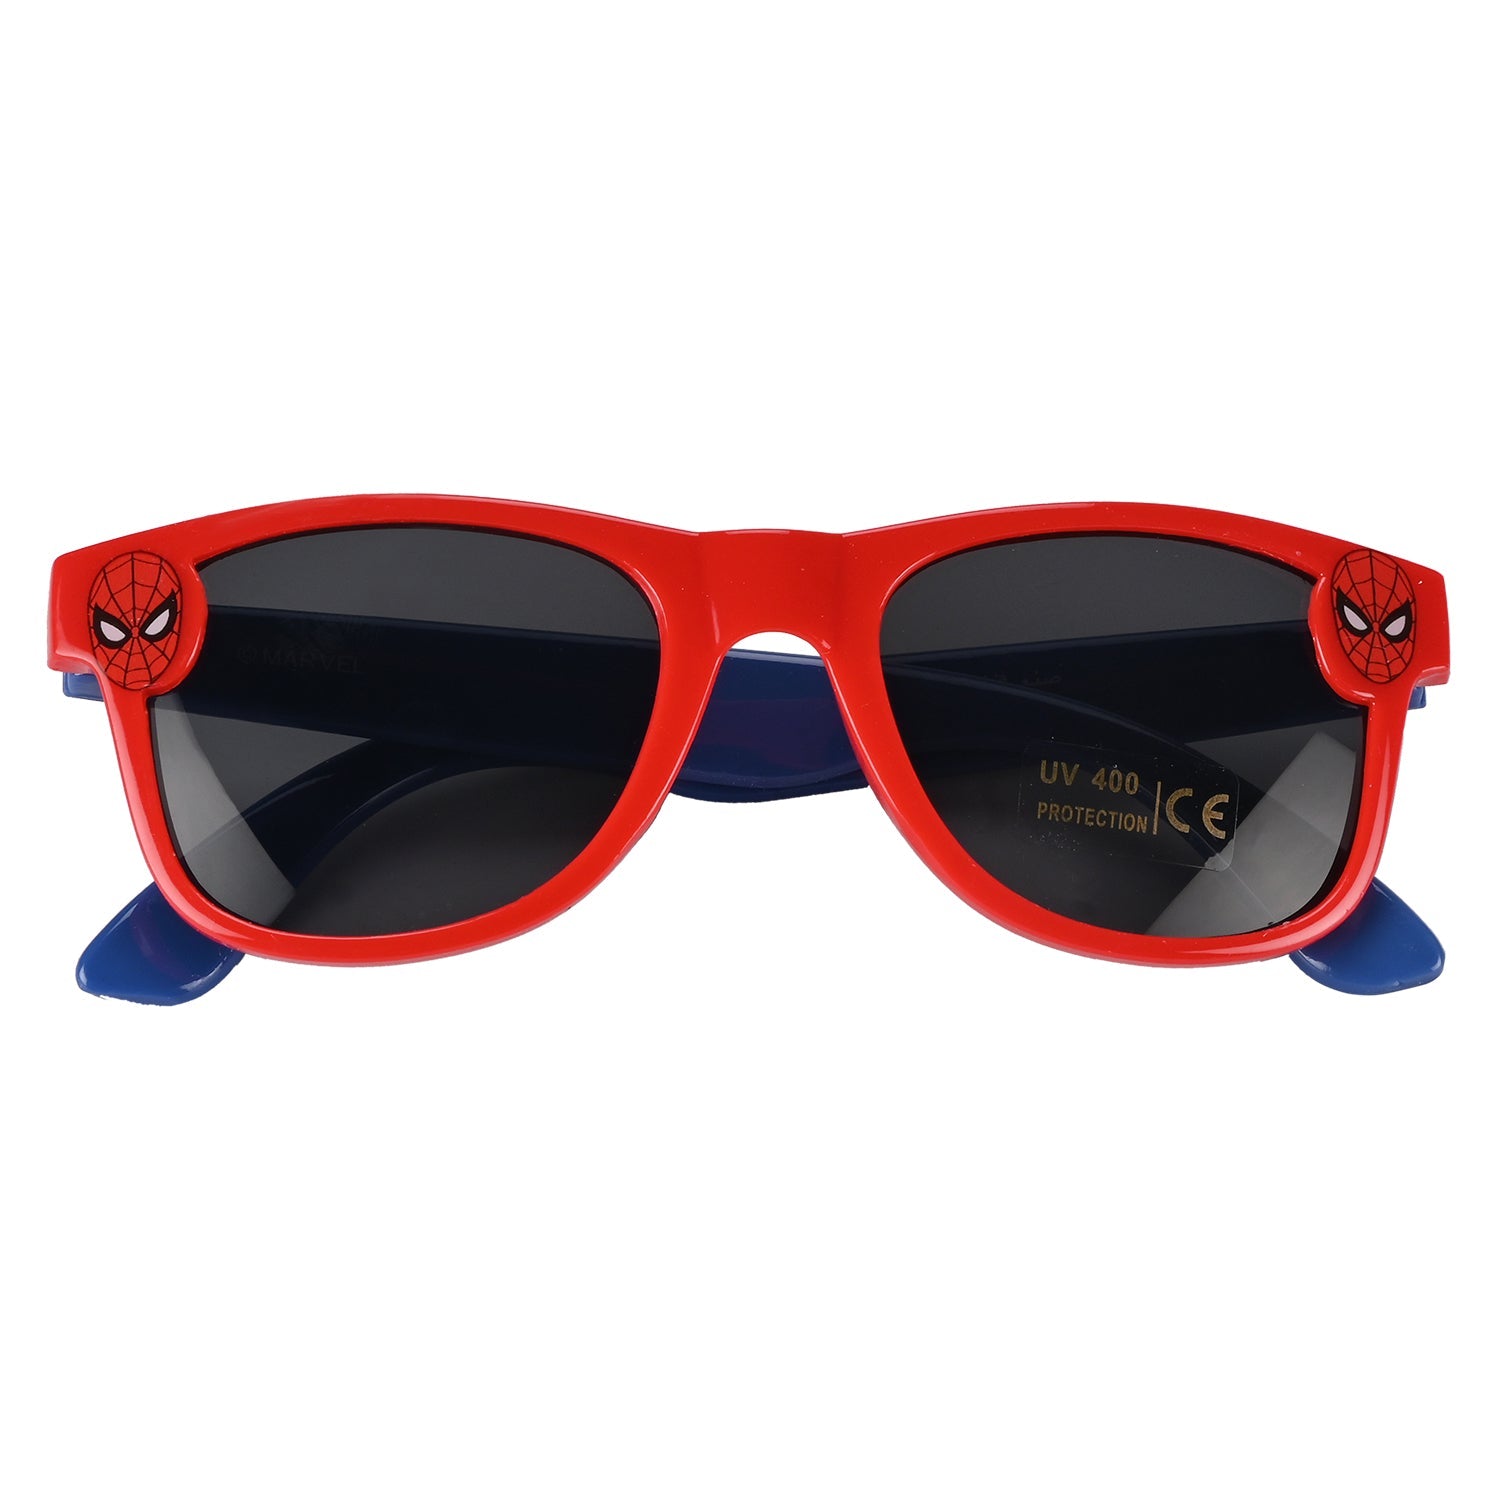 Marvel Kids Spiderman Sunglasses (Headercard + Poly bag) - Toys4All.in